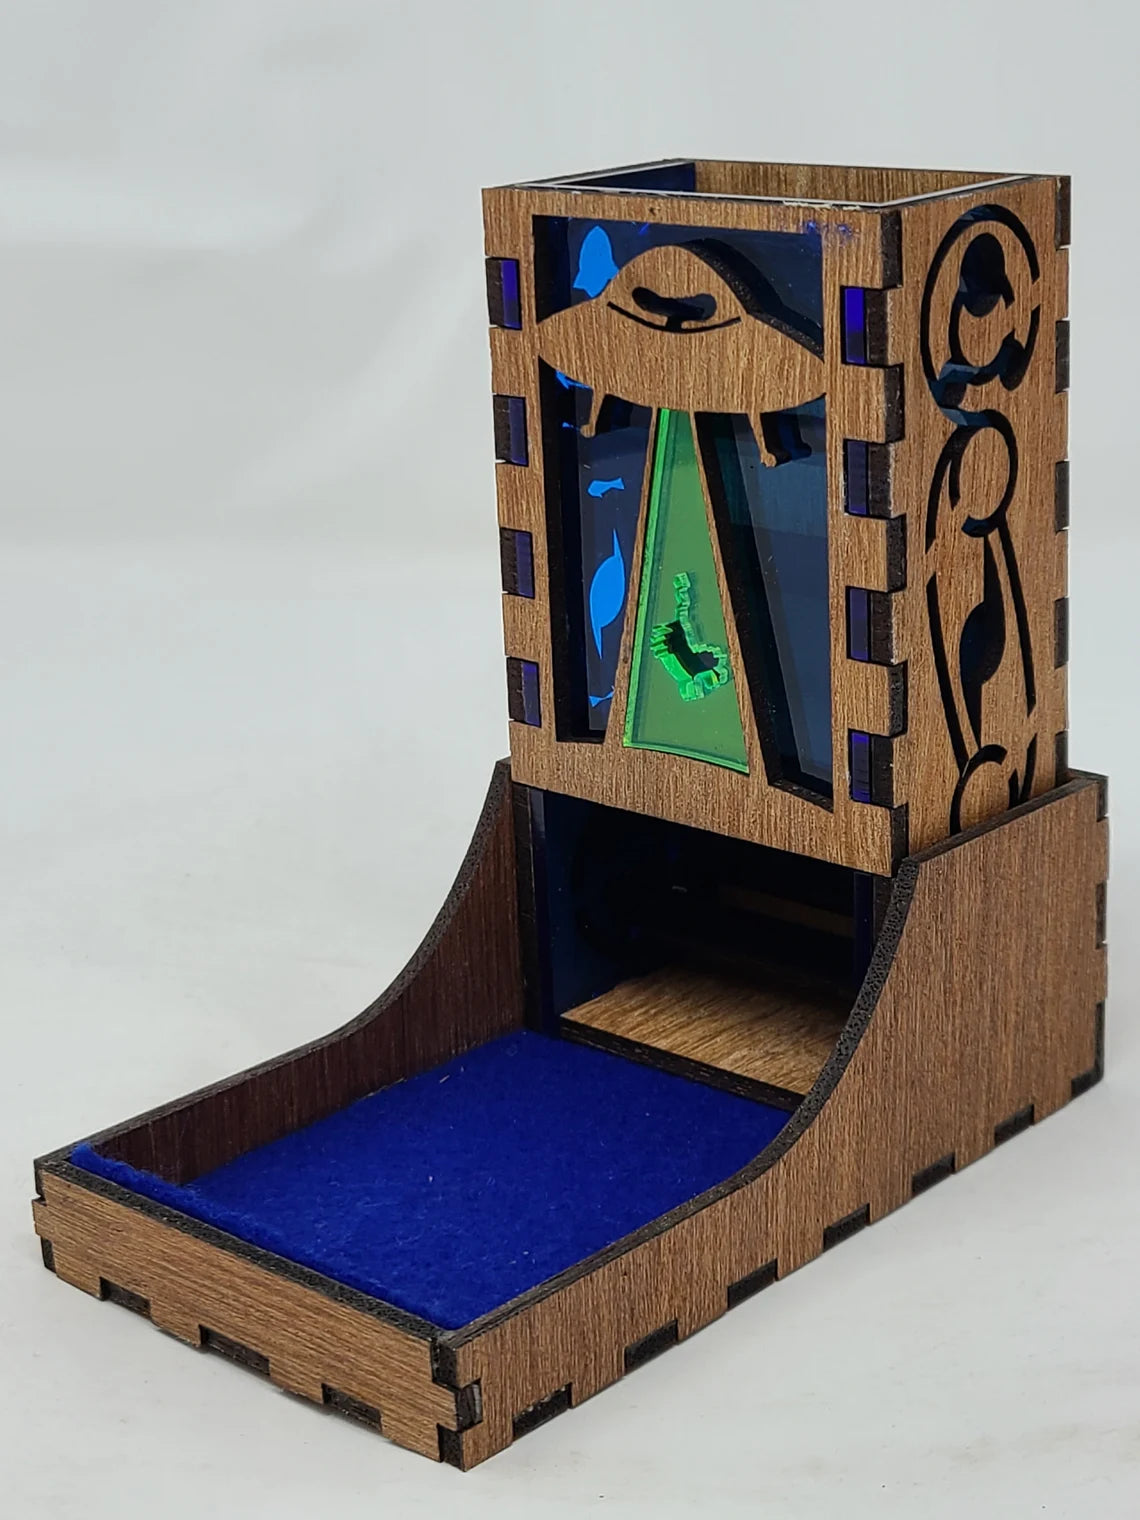 Alien Cow - Dice Tower - Traveler 3.0 by Vulcan Forge Creations